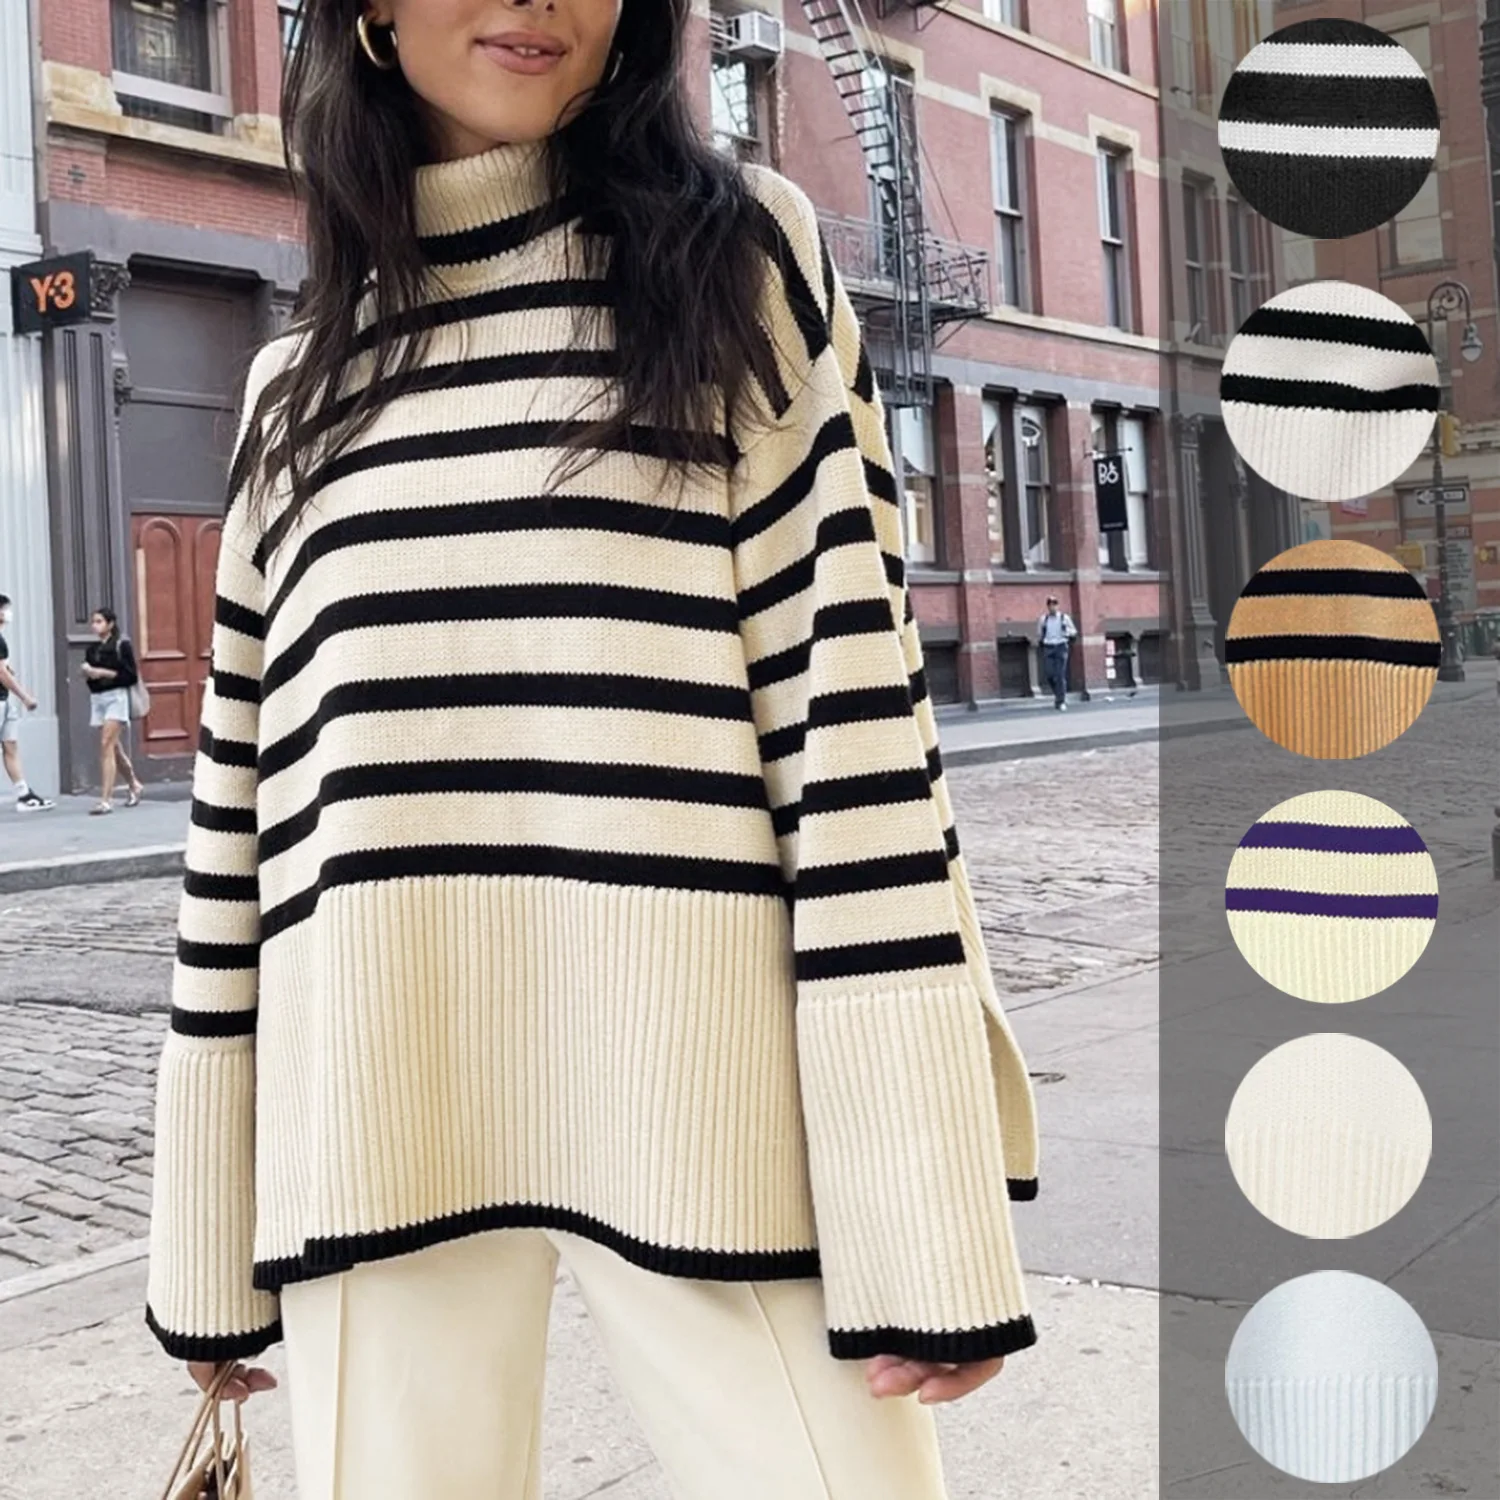 

Winter Loose Striped Christmas Sweater Women Knitted Slit Weater Pullovers Spring Fashion Oversize Stripe Top Turtleneck Sweater